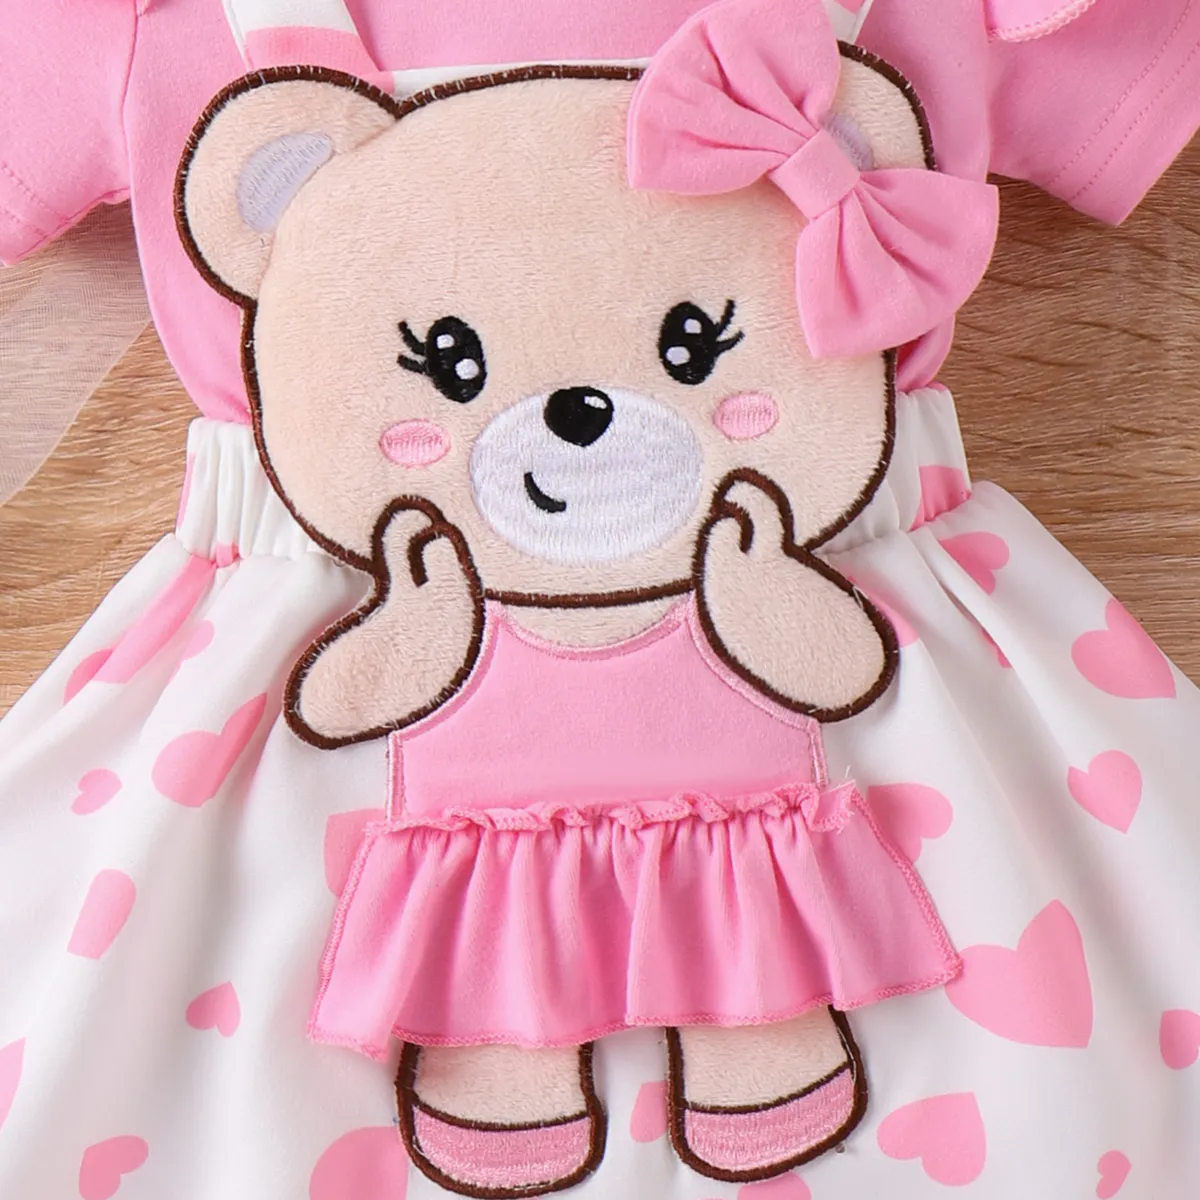 Baby Girl 3pcs Solid Romper and Bear Embroidery Overall Dress with Headband Set Pink big image 1